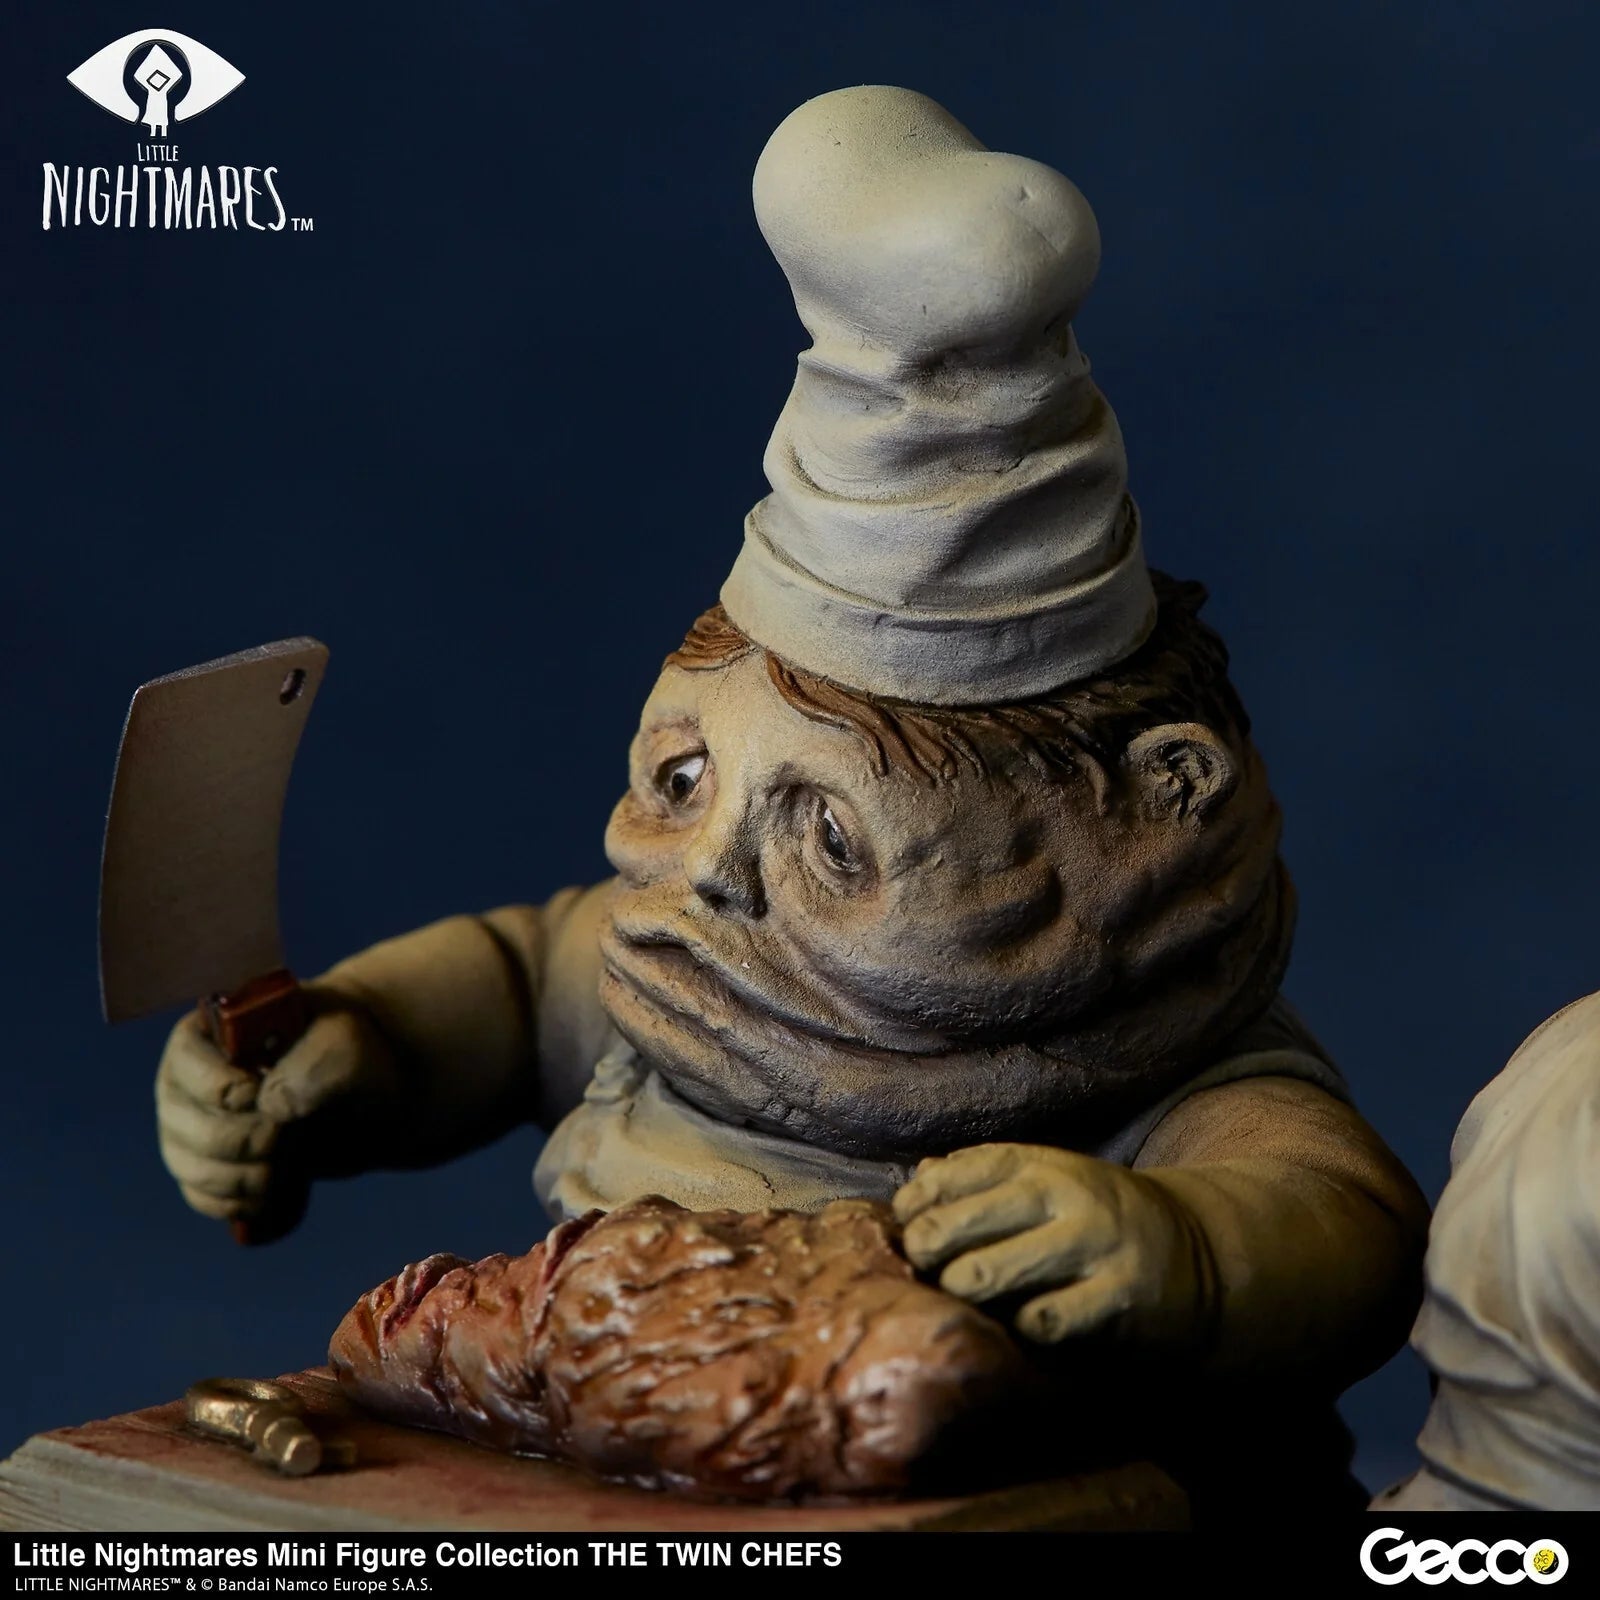 Little Nightmares: The Twin Chefs: Mini Figure Collection: Gecco